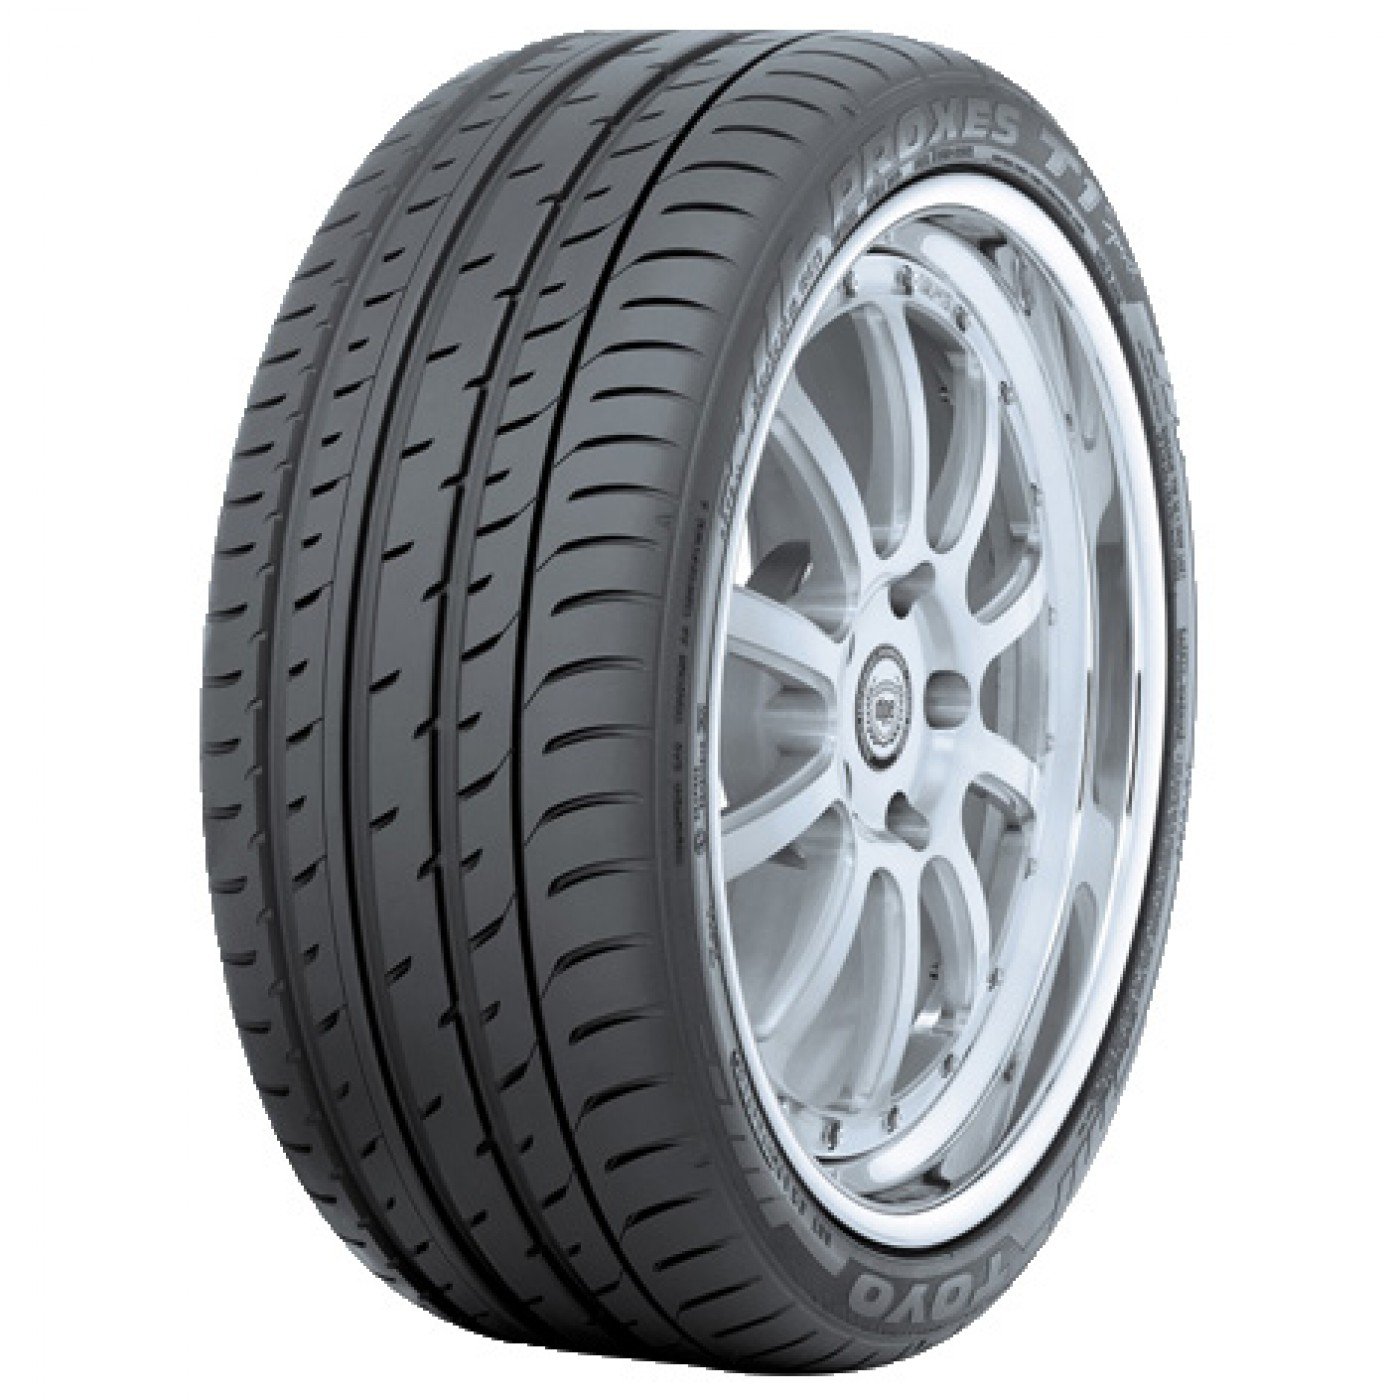 Toyo proxes sport r19. Toyo PROXES t1 Sport. Шины Toyo PROXES t1 Sport SUV. Toyo PROXES t1 Sport 215/45 r17 91w. Toyo PROXES t1 Sport 94w.